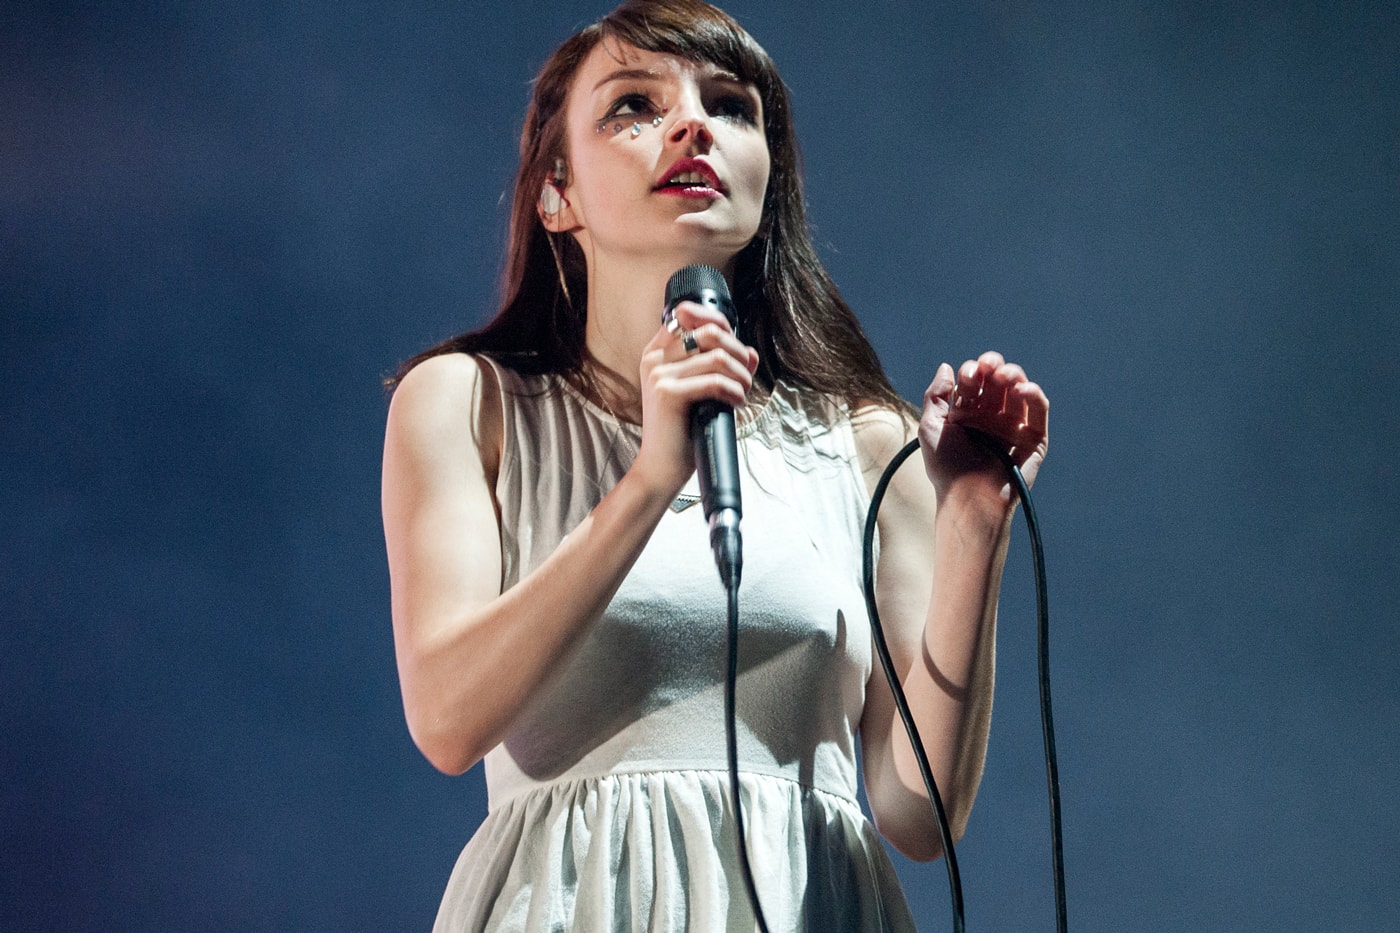 chvrches-go-animated-in-new-video-for-bury-it-featuring-hayley-williams